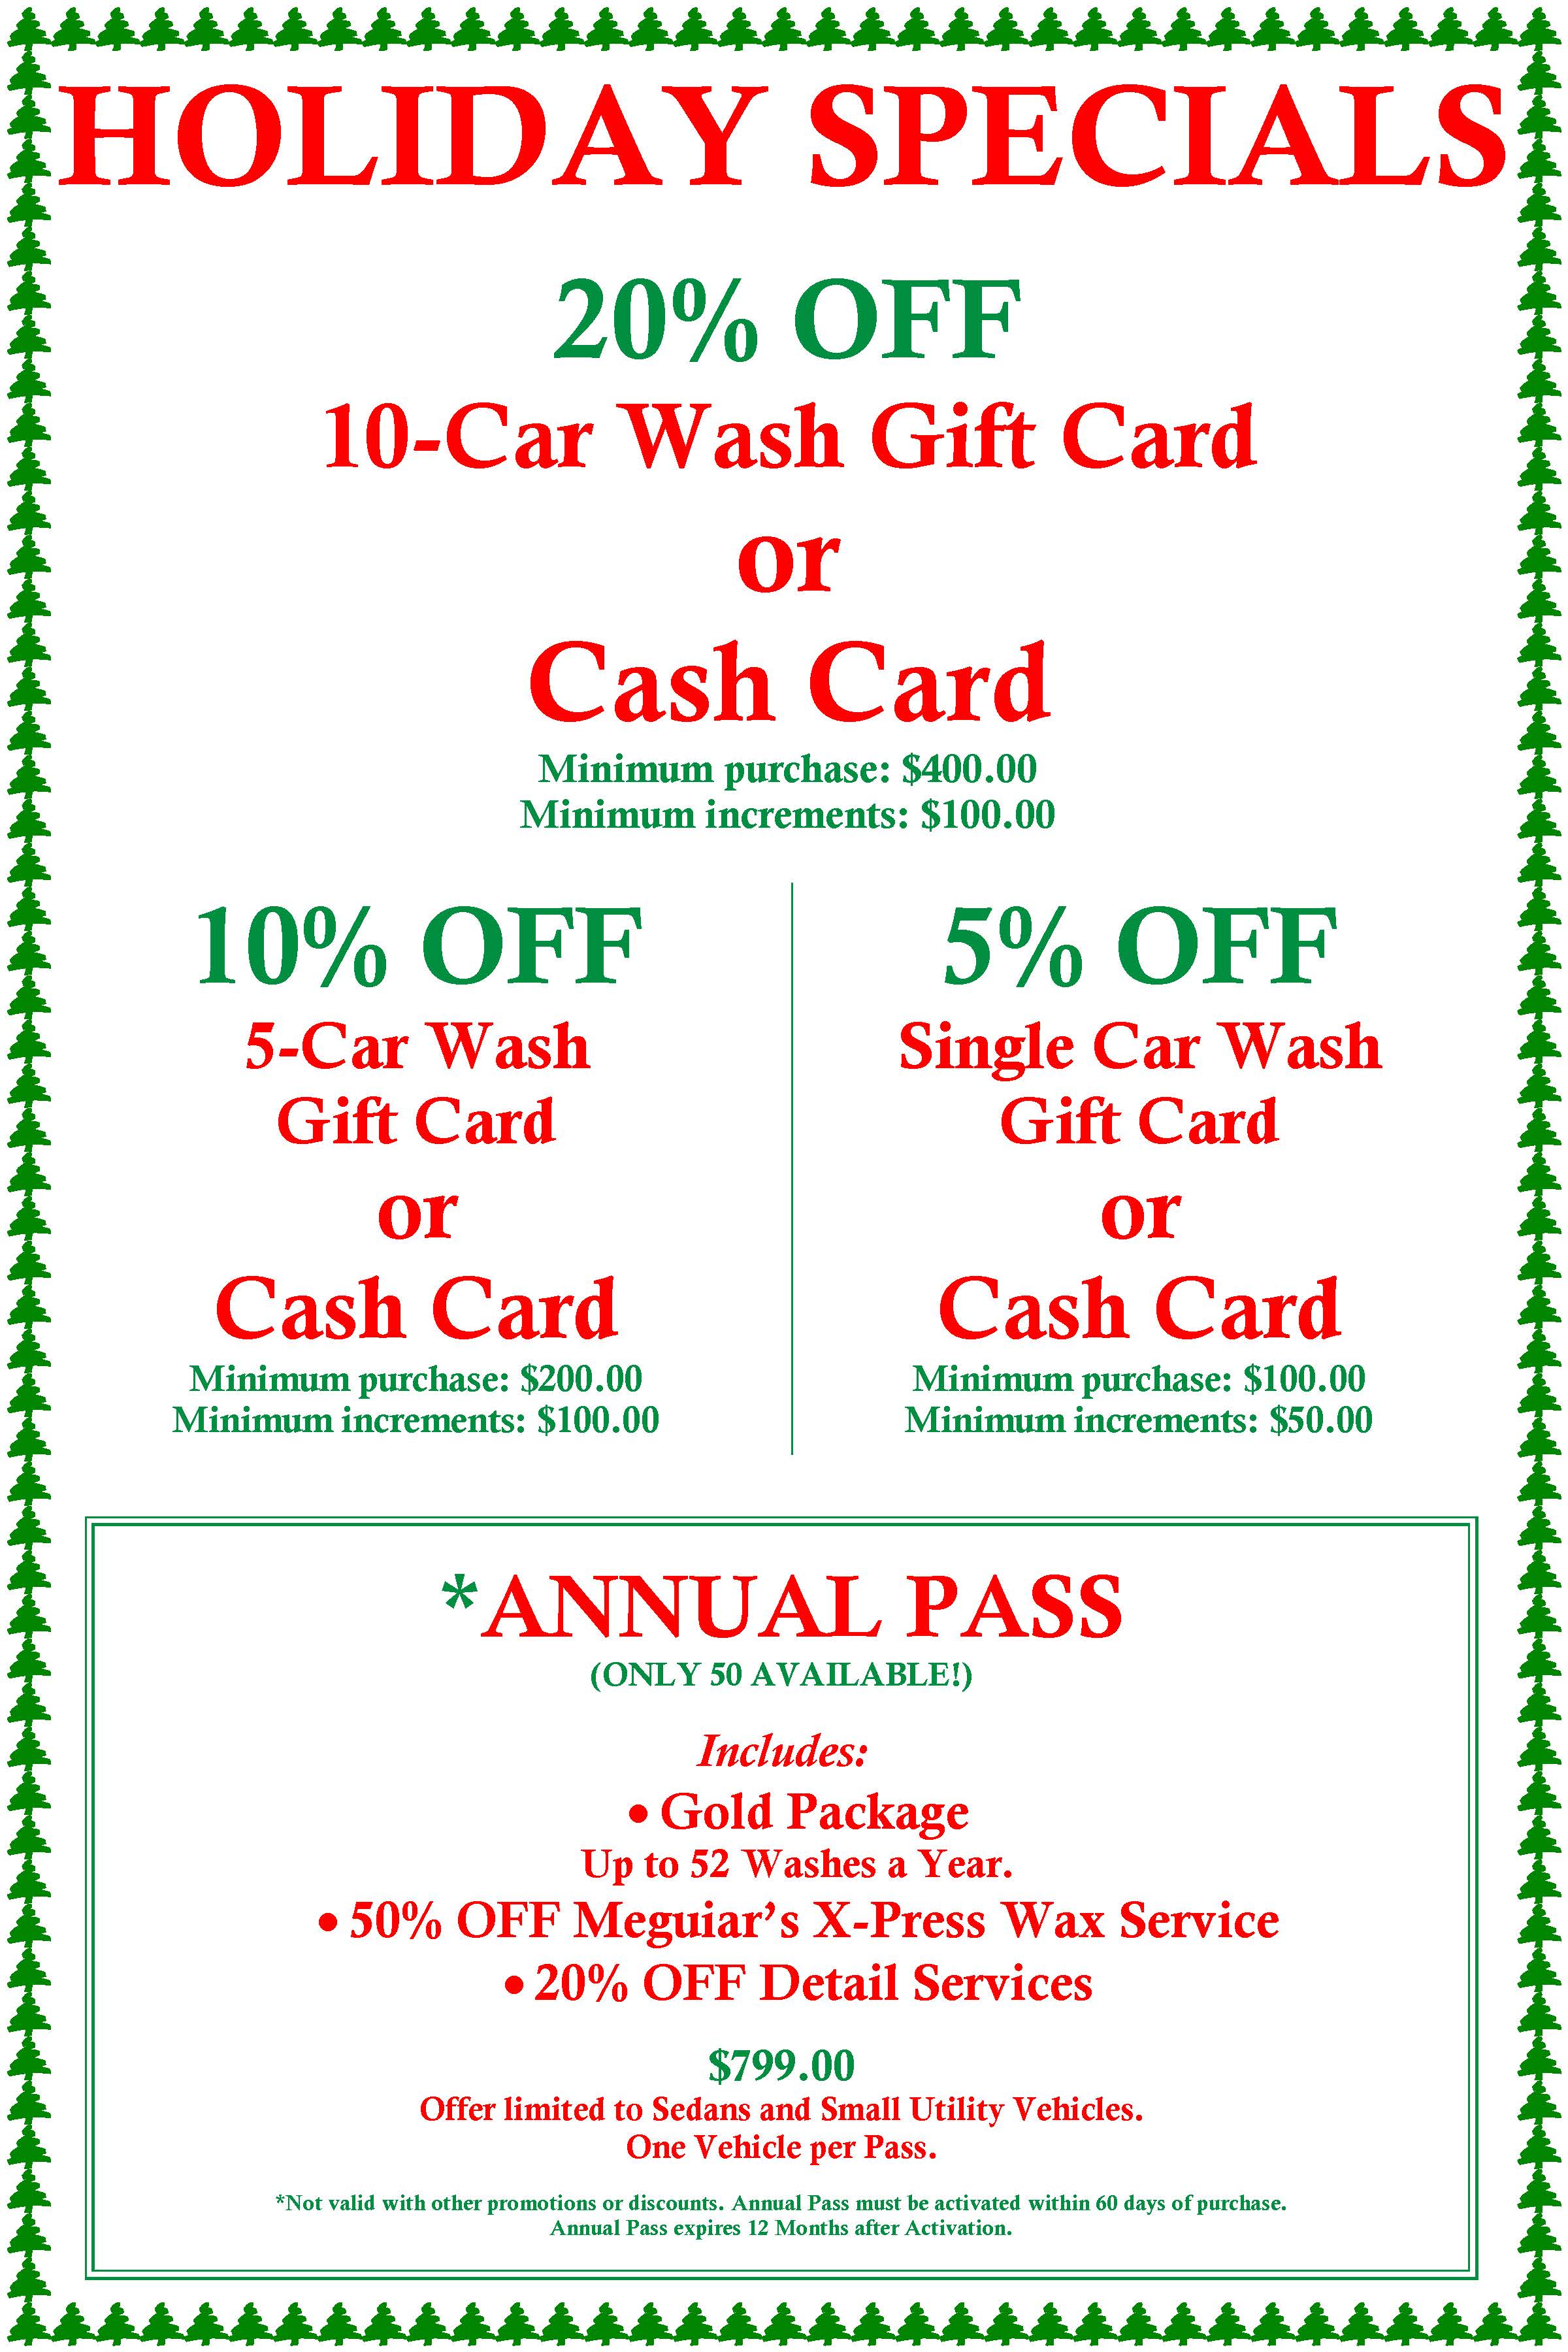 Holiday Gift Card Specials